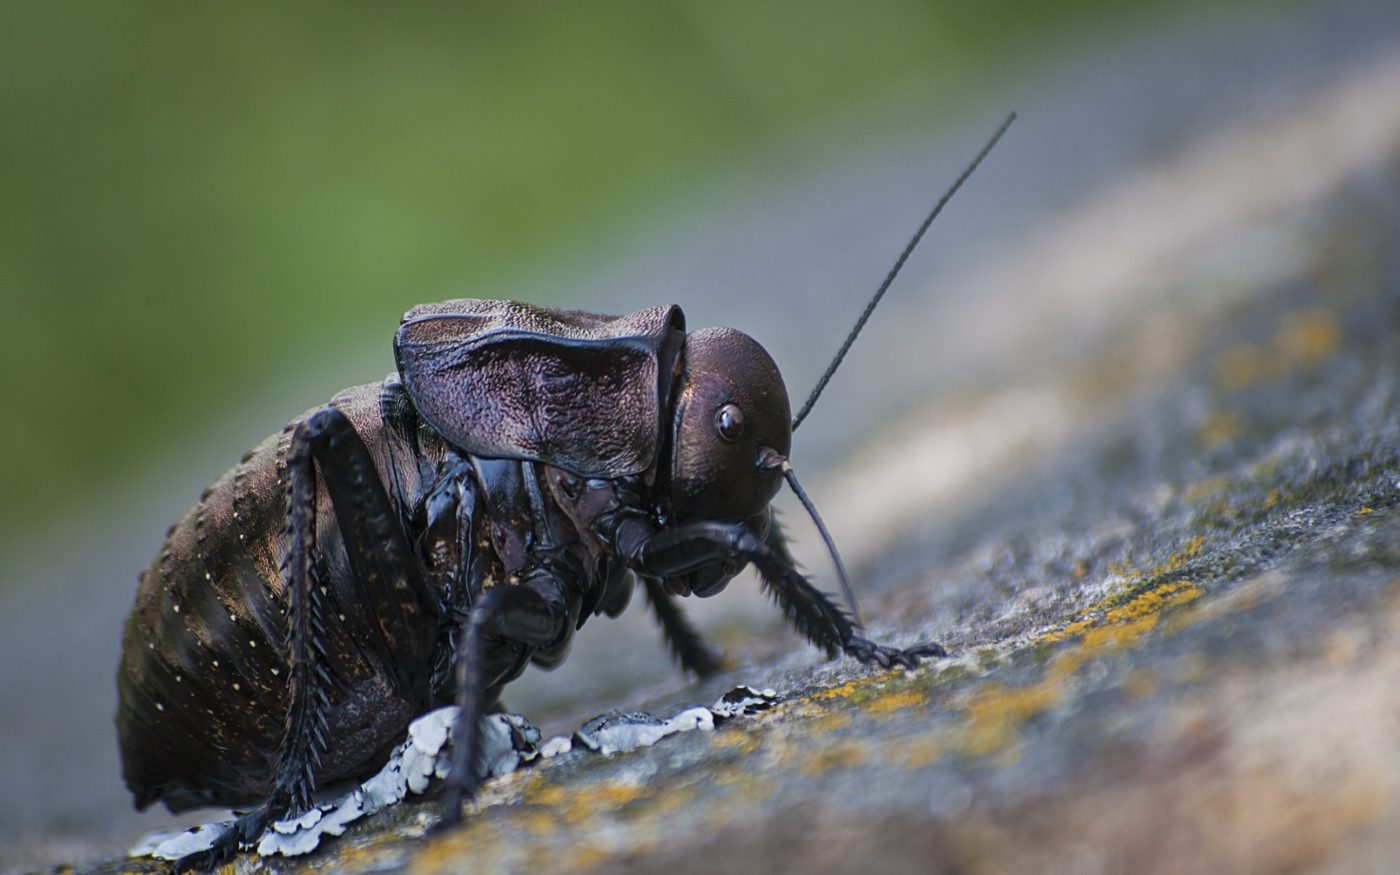 A male big-bellied cricket, Bradiphorus dasiphus, in the Măcin Mountains of Romania. To Iuliana Dediu, the appearance of this sturdy cricket of the mountains is reminiscent of an armoured soldier.